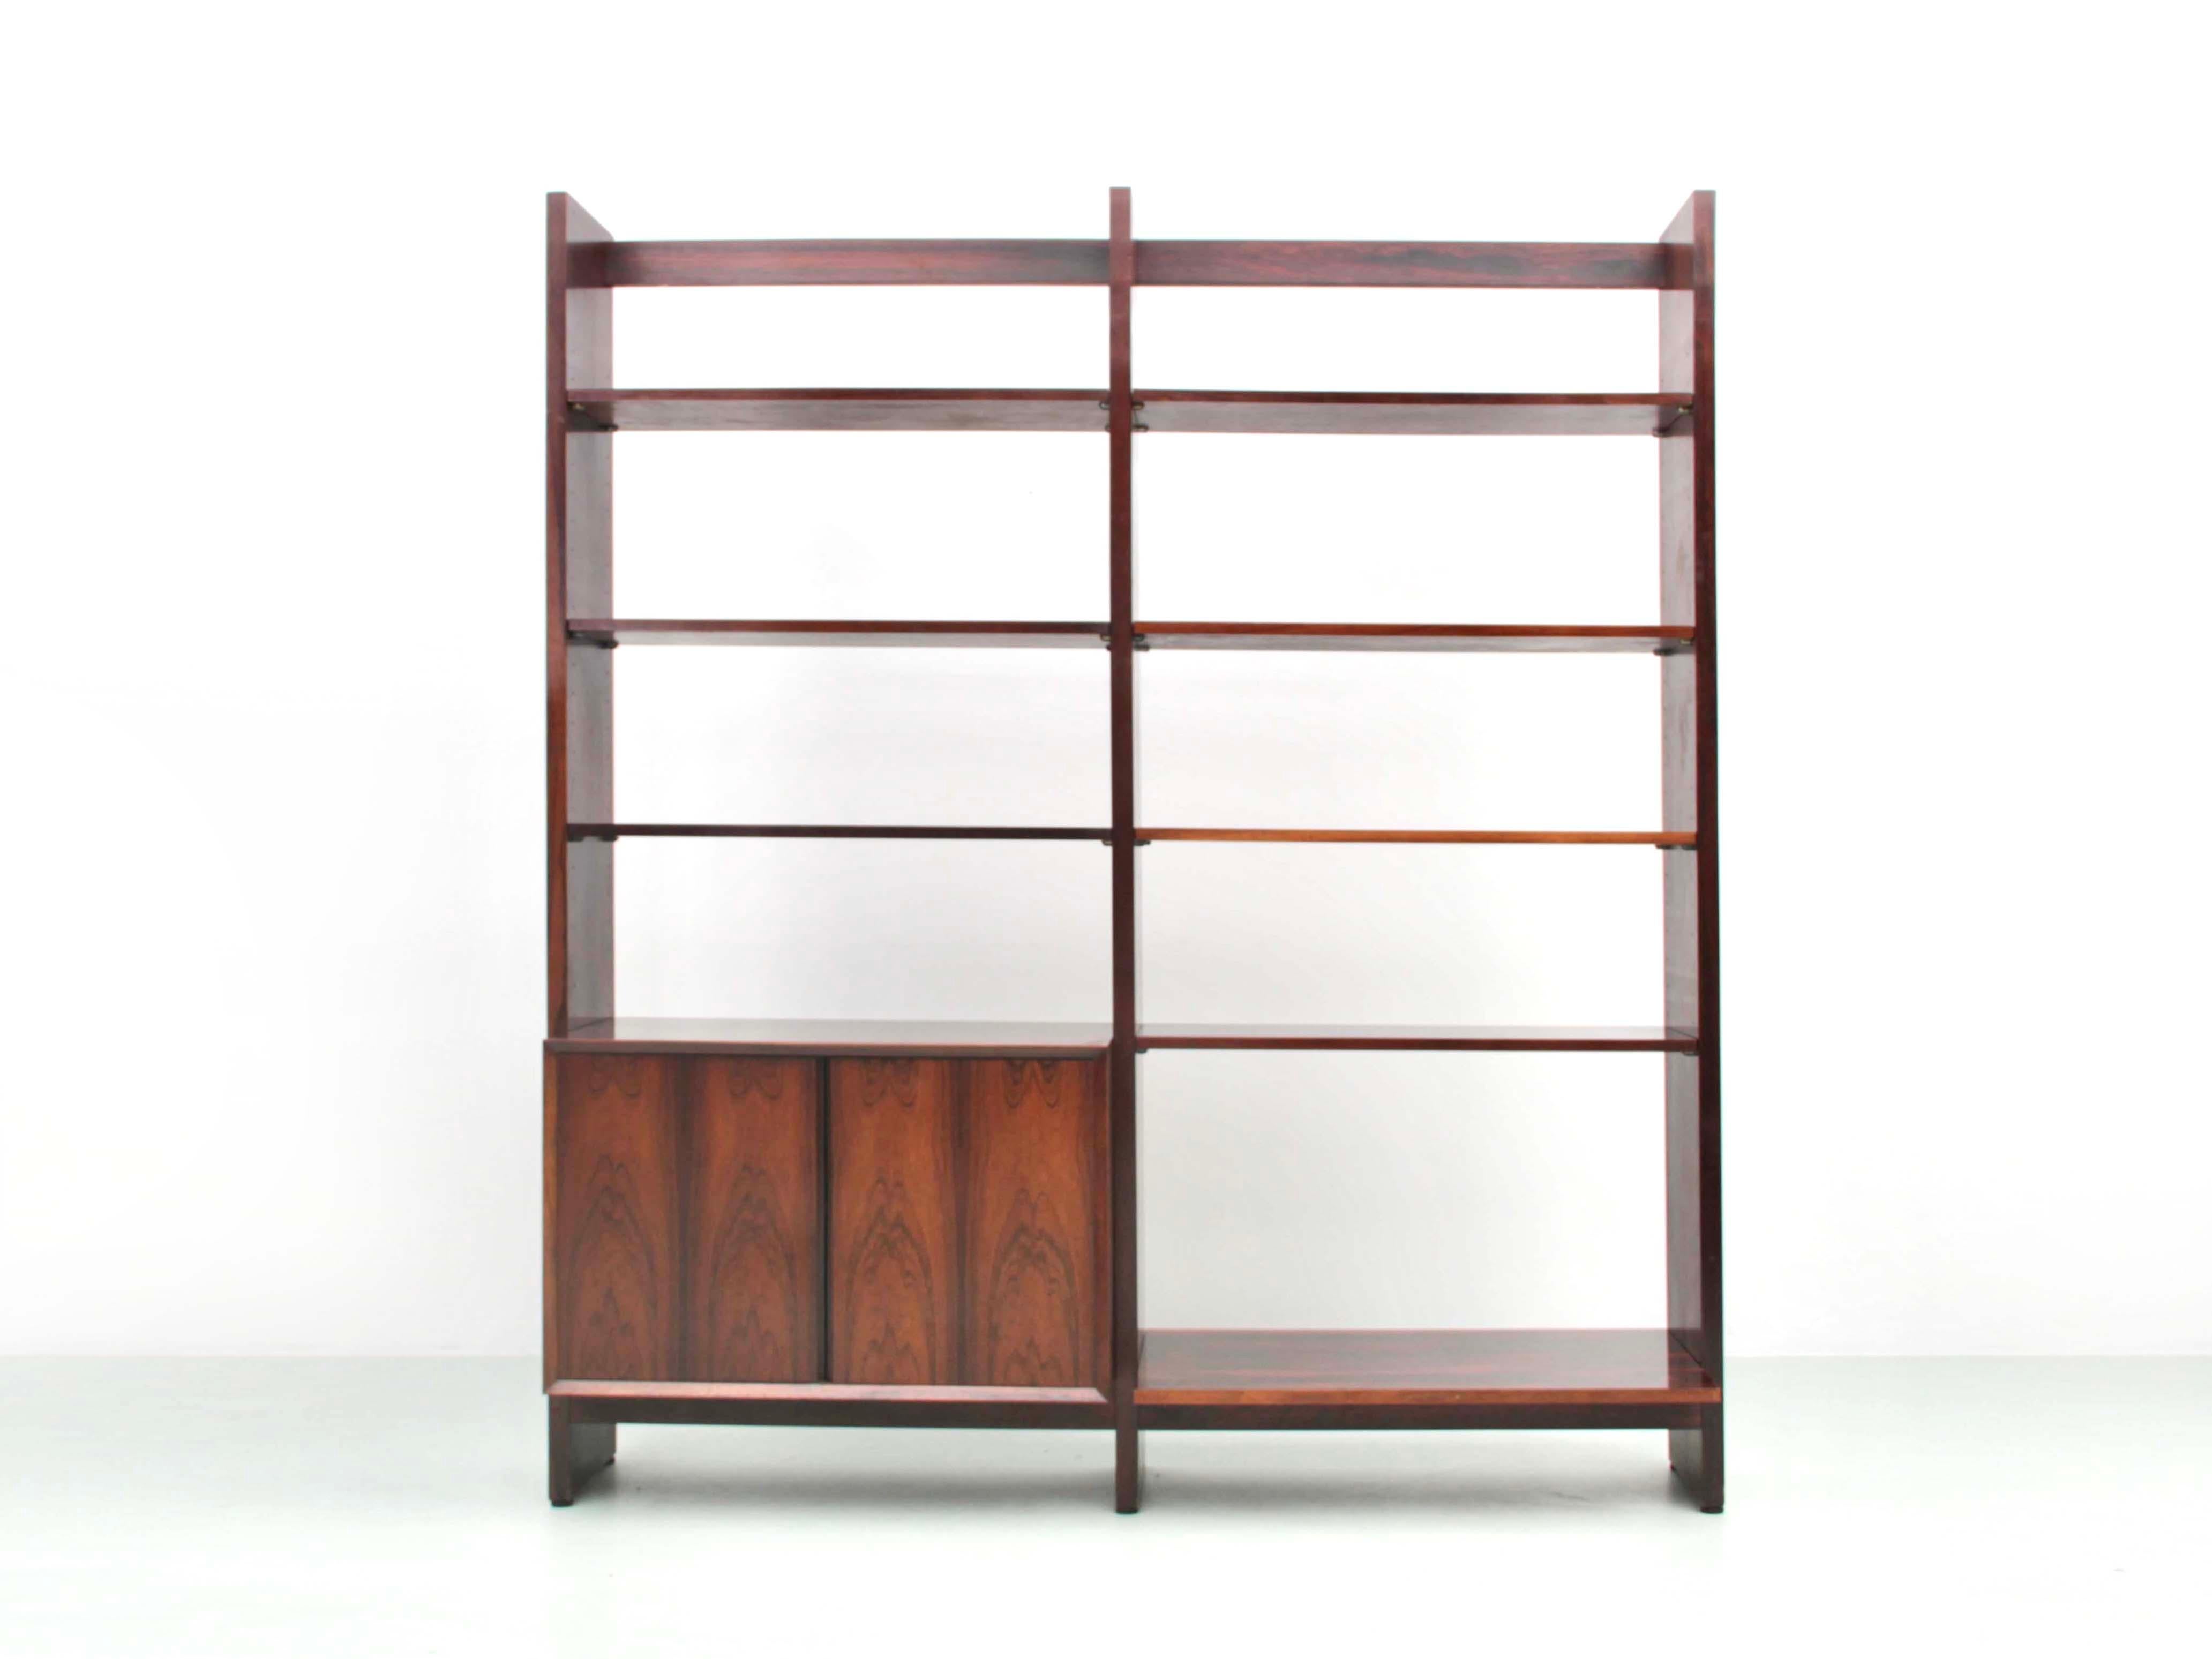 Mid-Century Modern Danish Cado shelve system. Composed of 2 side panels, 7 shelves P = 30cm; 1 shelf P = 46 cm; 1 cabinet with 2 opening doors on hinges, an interior shelf adjustable in height, P = 46 cm.
Each panel is equipped with 2